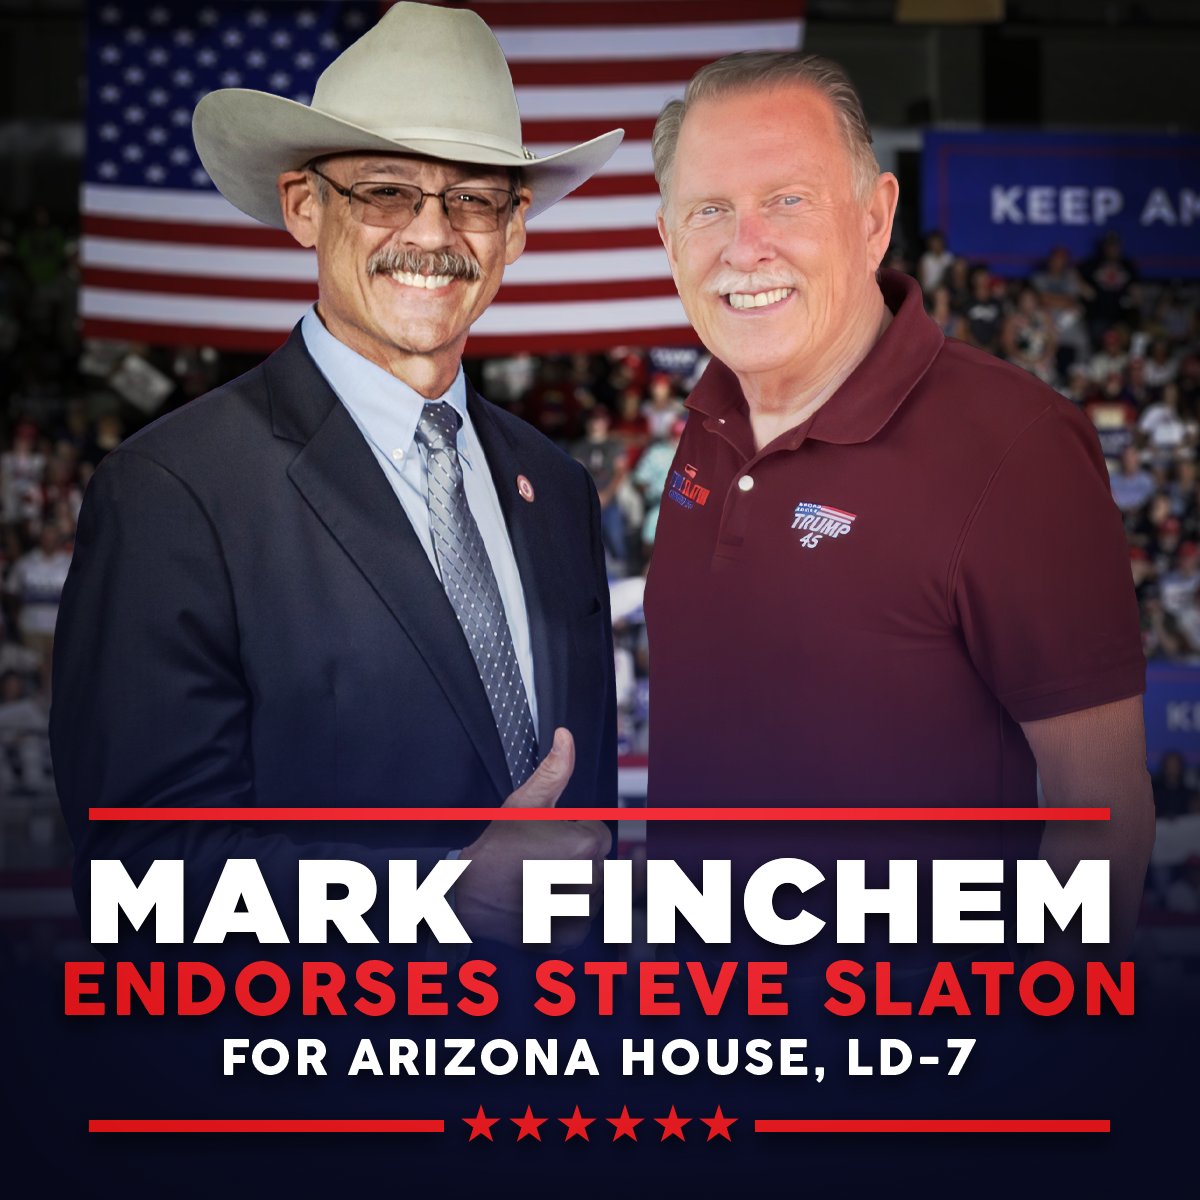 I wholeheartedly endorse @SteveSlatonAZ for State House in #LD7. He is a combat veteran, a stalwart #AmericaFirst fighter, and is a conservative Trump supporter who has never wavered in his support for President Trump or conservative policies. Steve will fight against the radical…